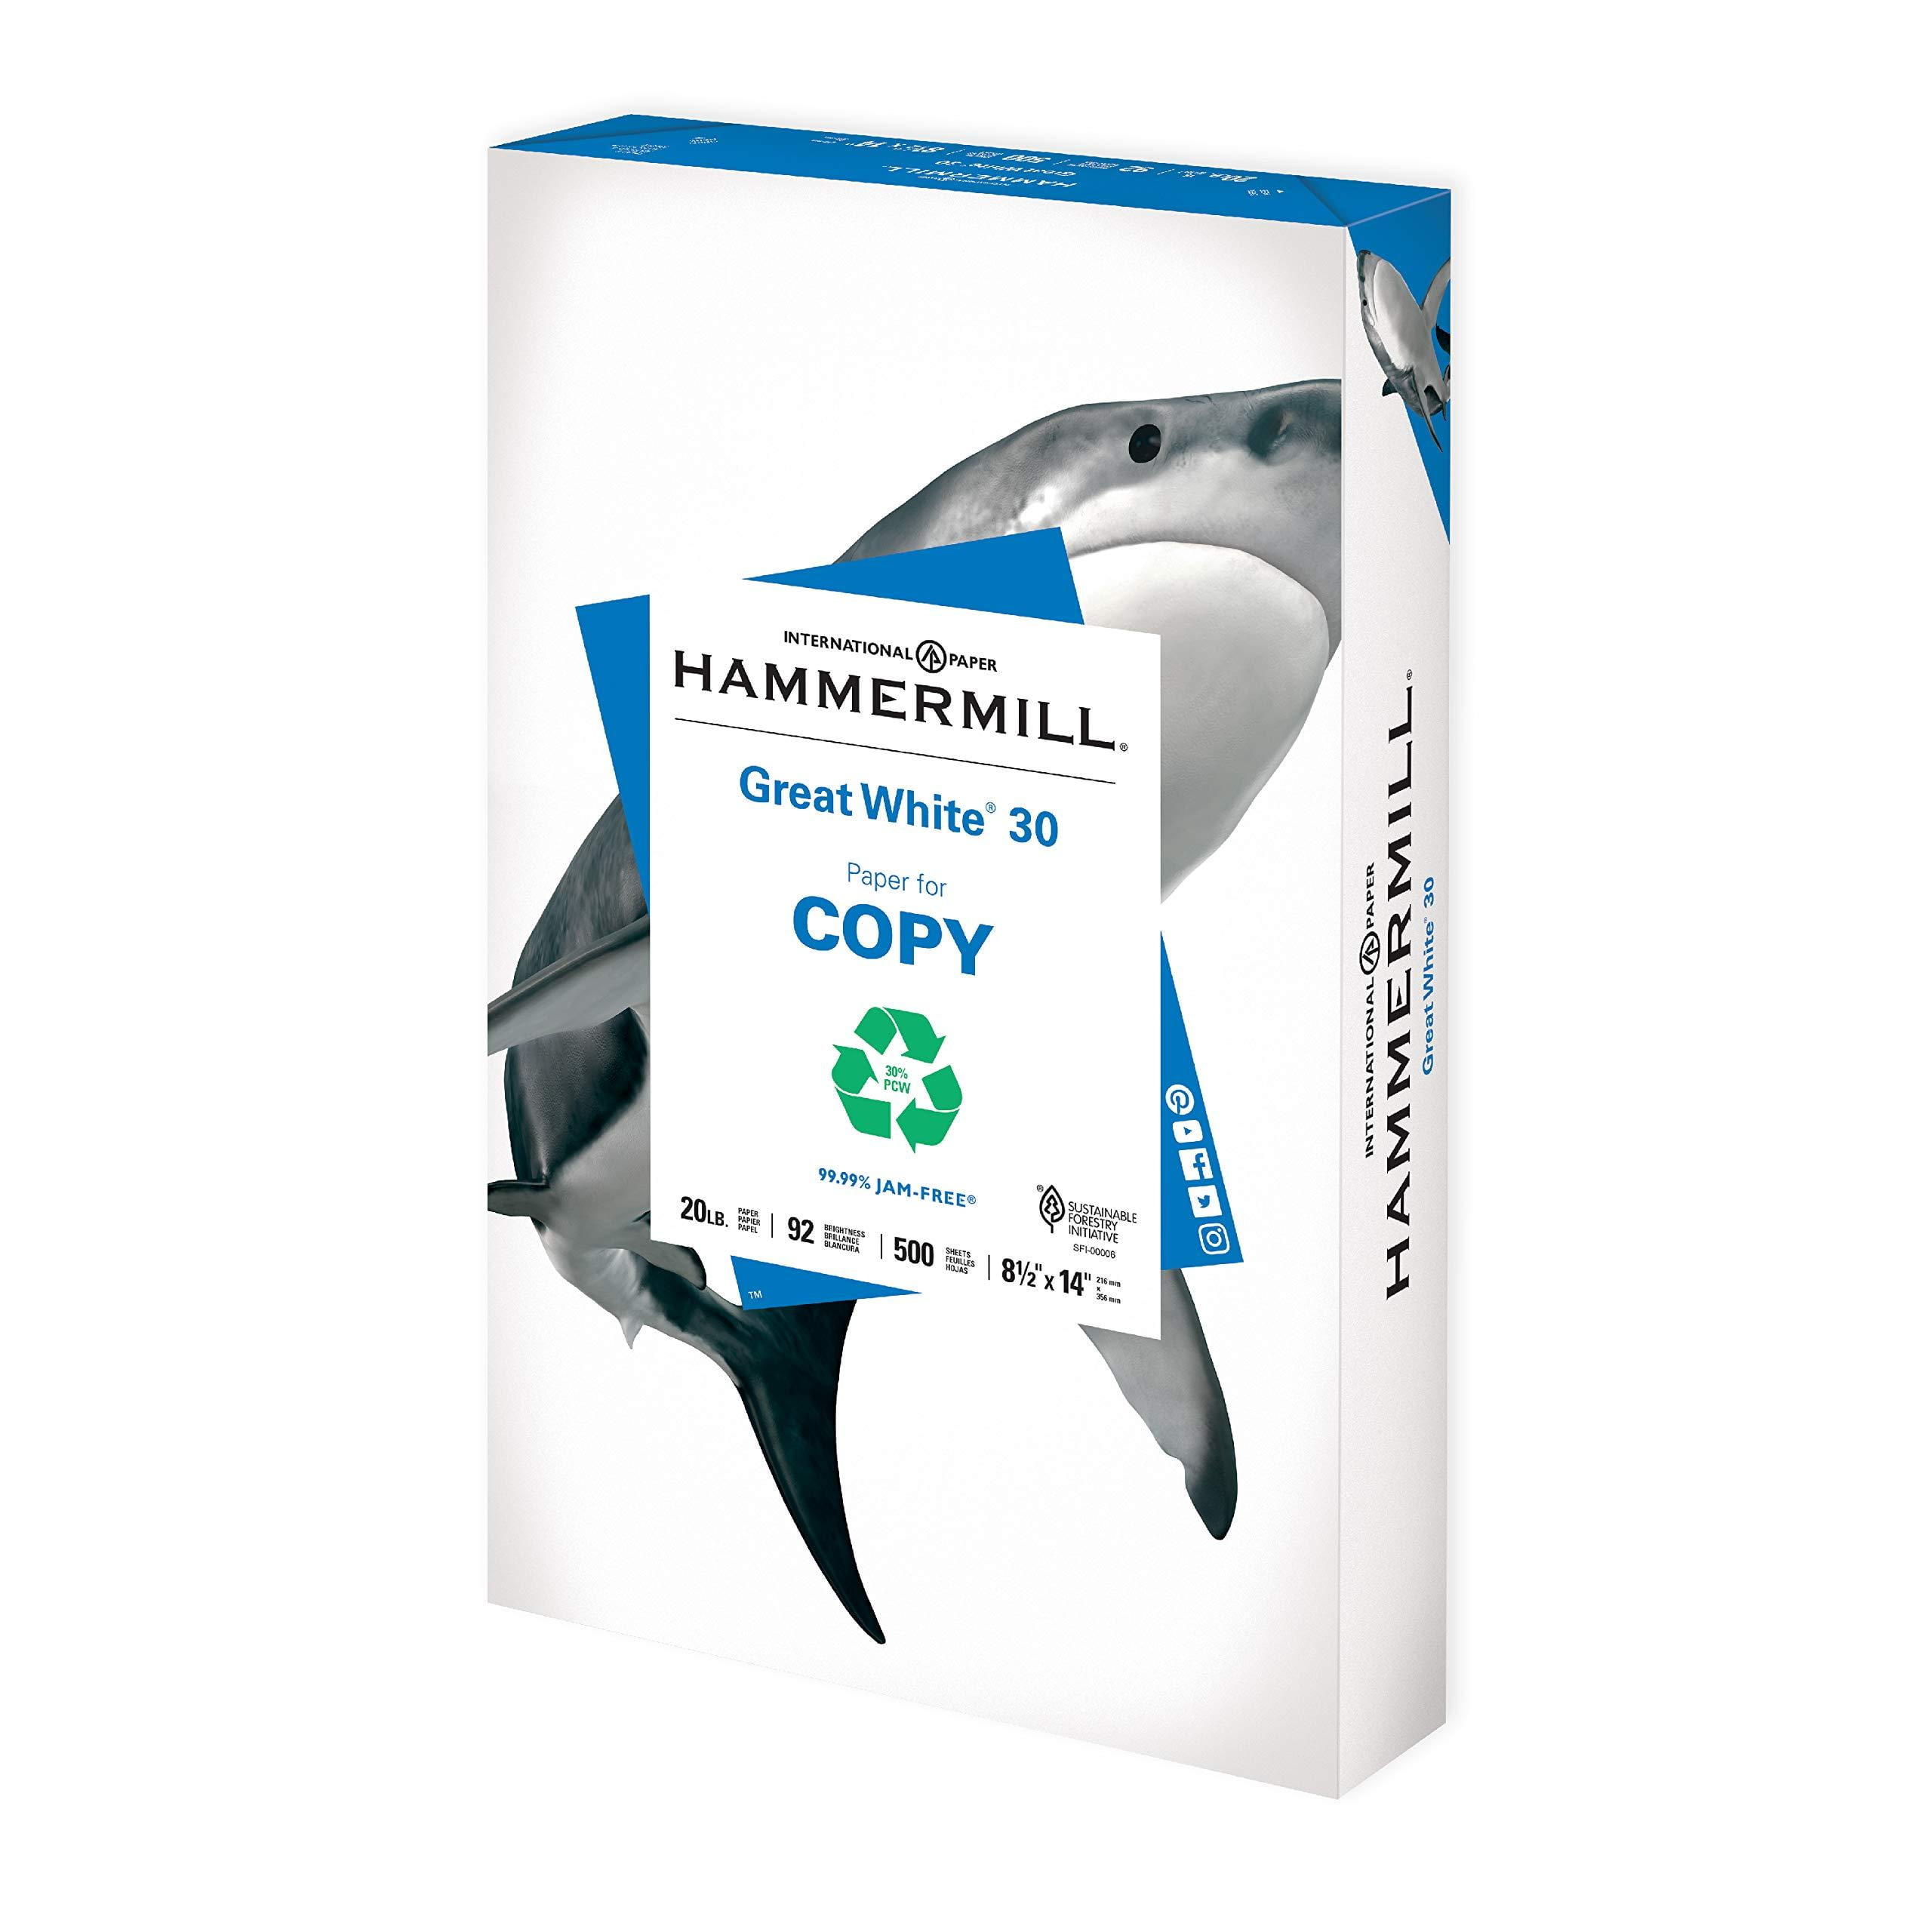 Hammermill Paper for Copy Recycled Paper 86750, 1 - Kroger